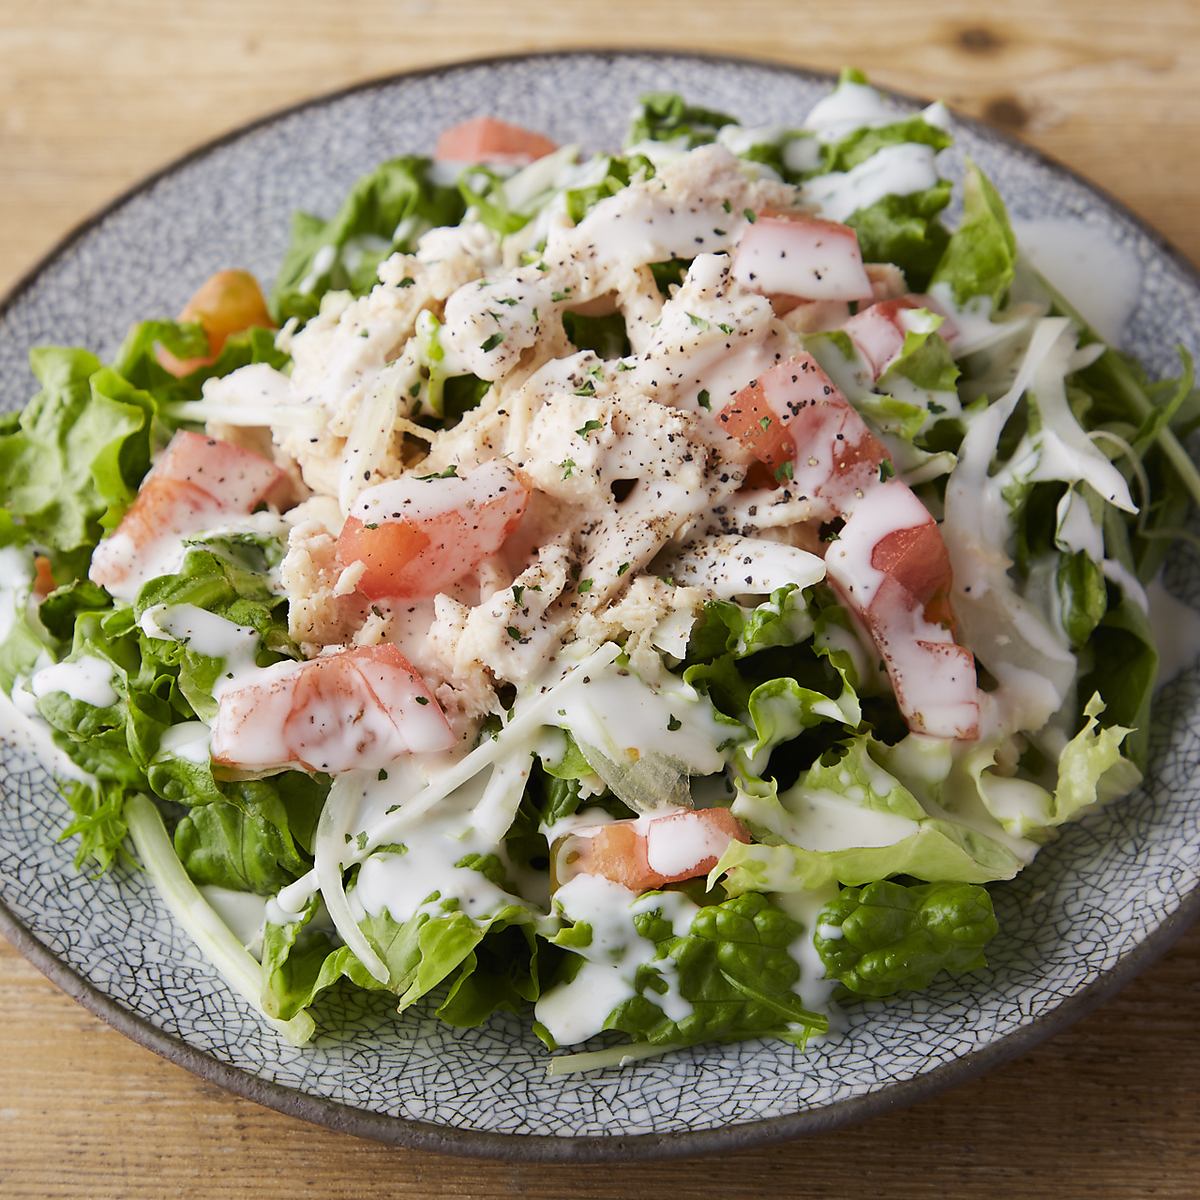 Salads made with extremely fresh seafood are also very popular with women.